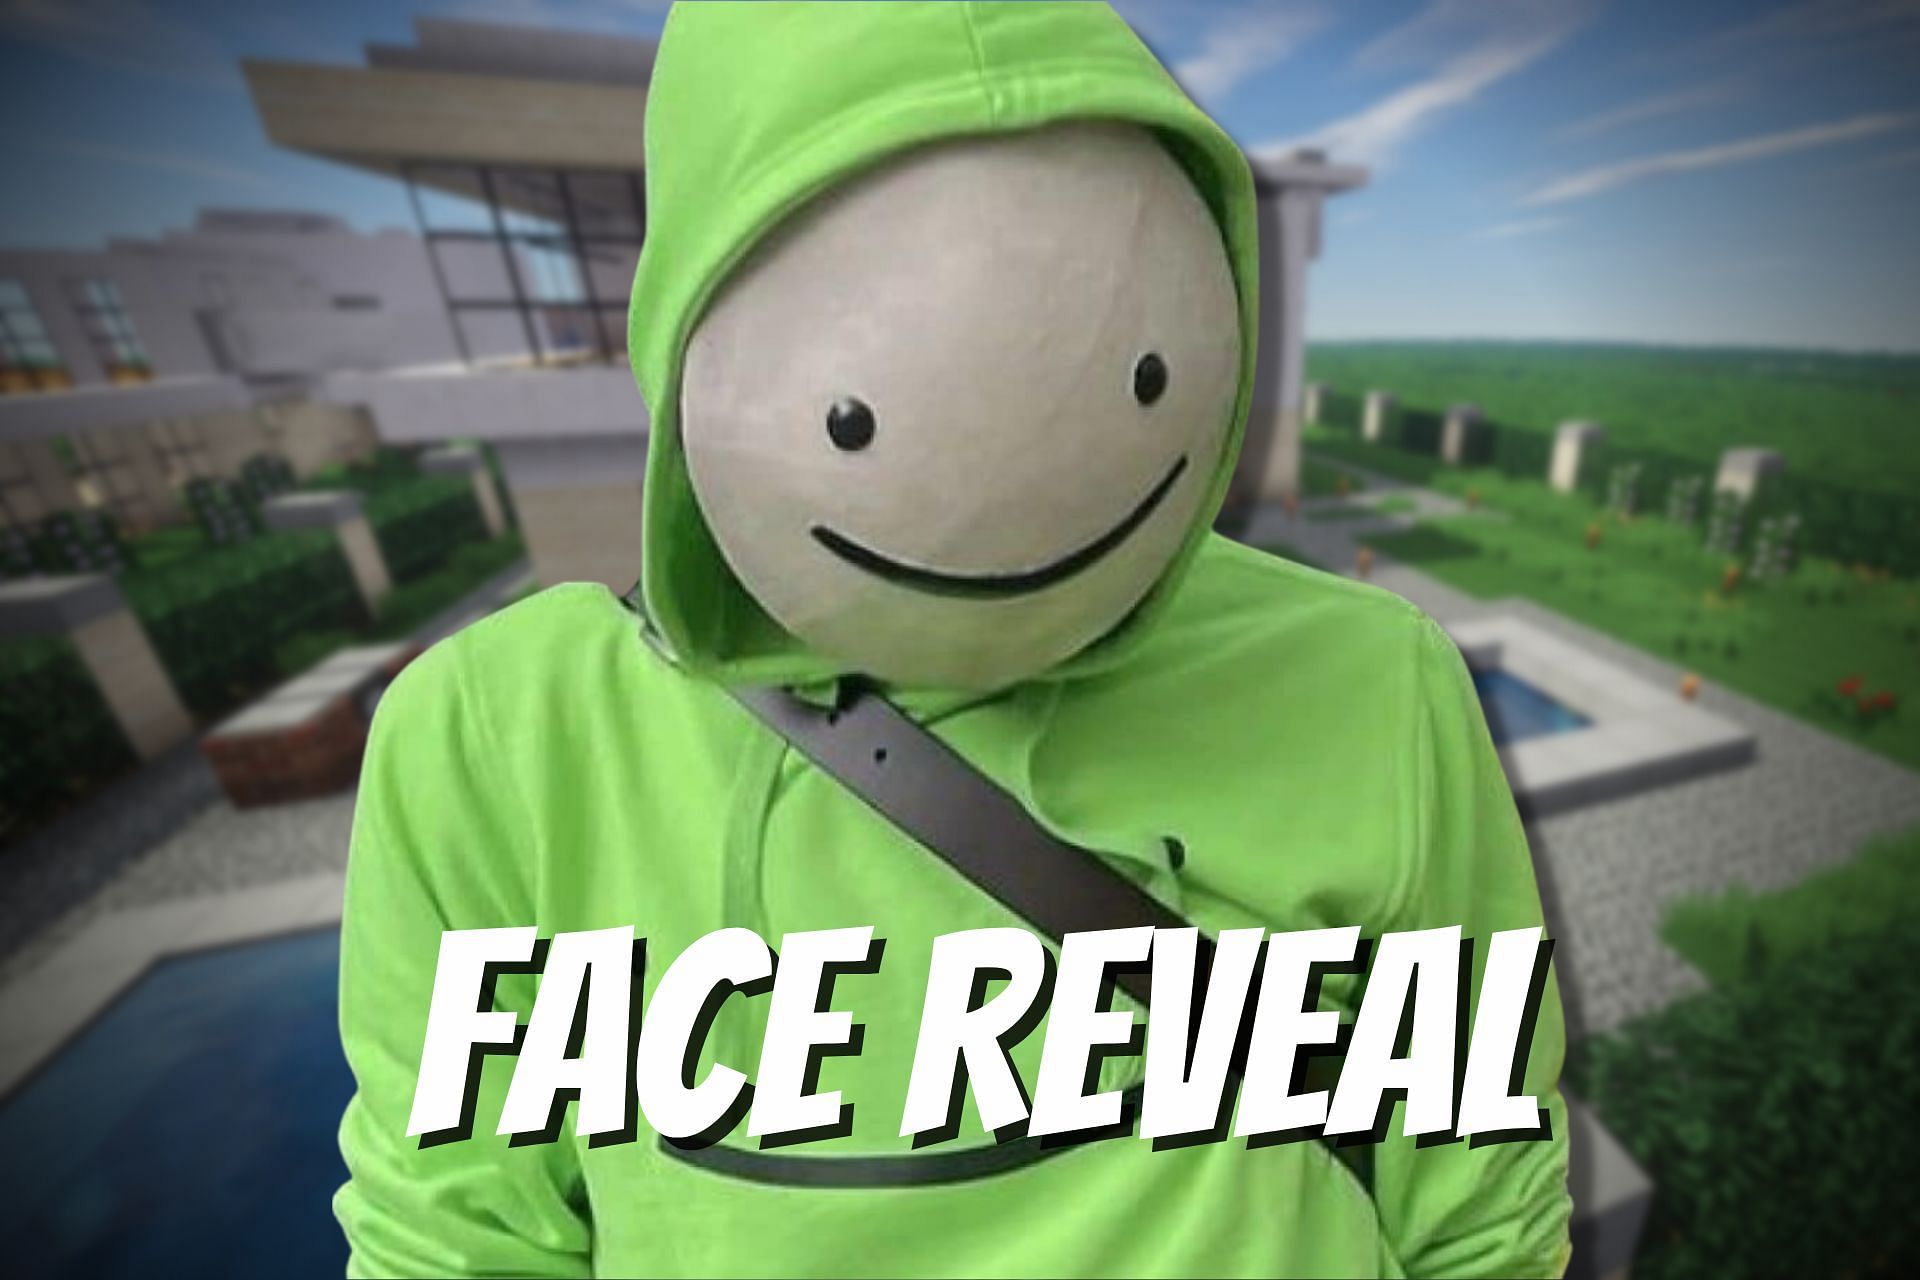 Minecraft Fame Dream teases the much-awaited face reveal (Image via Sportskeeda)